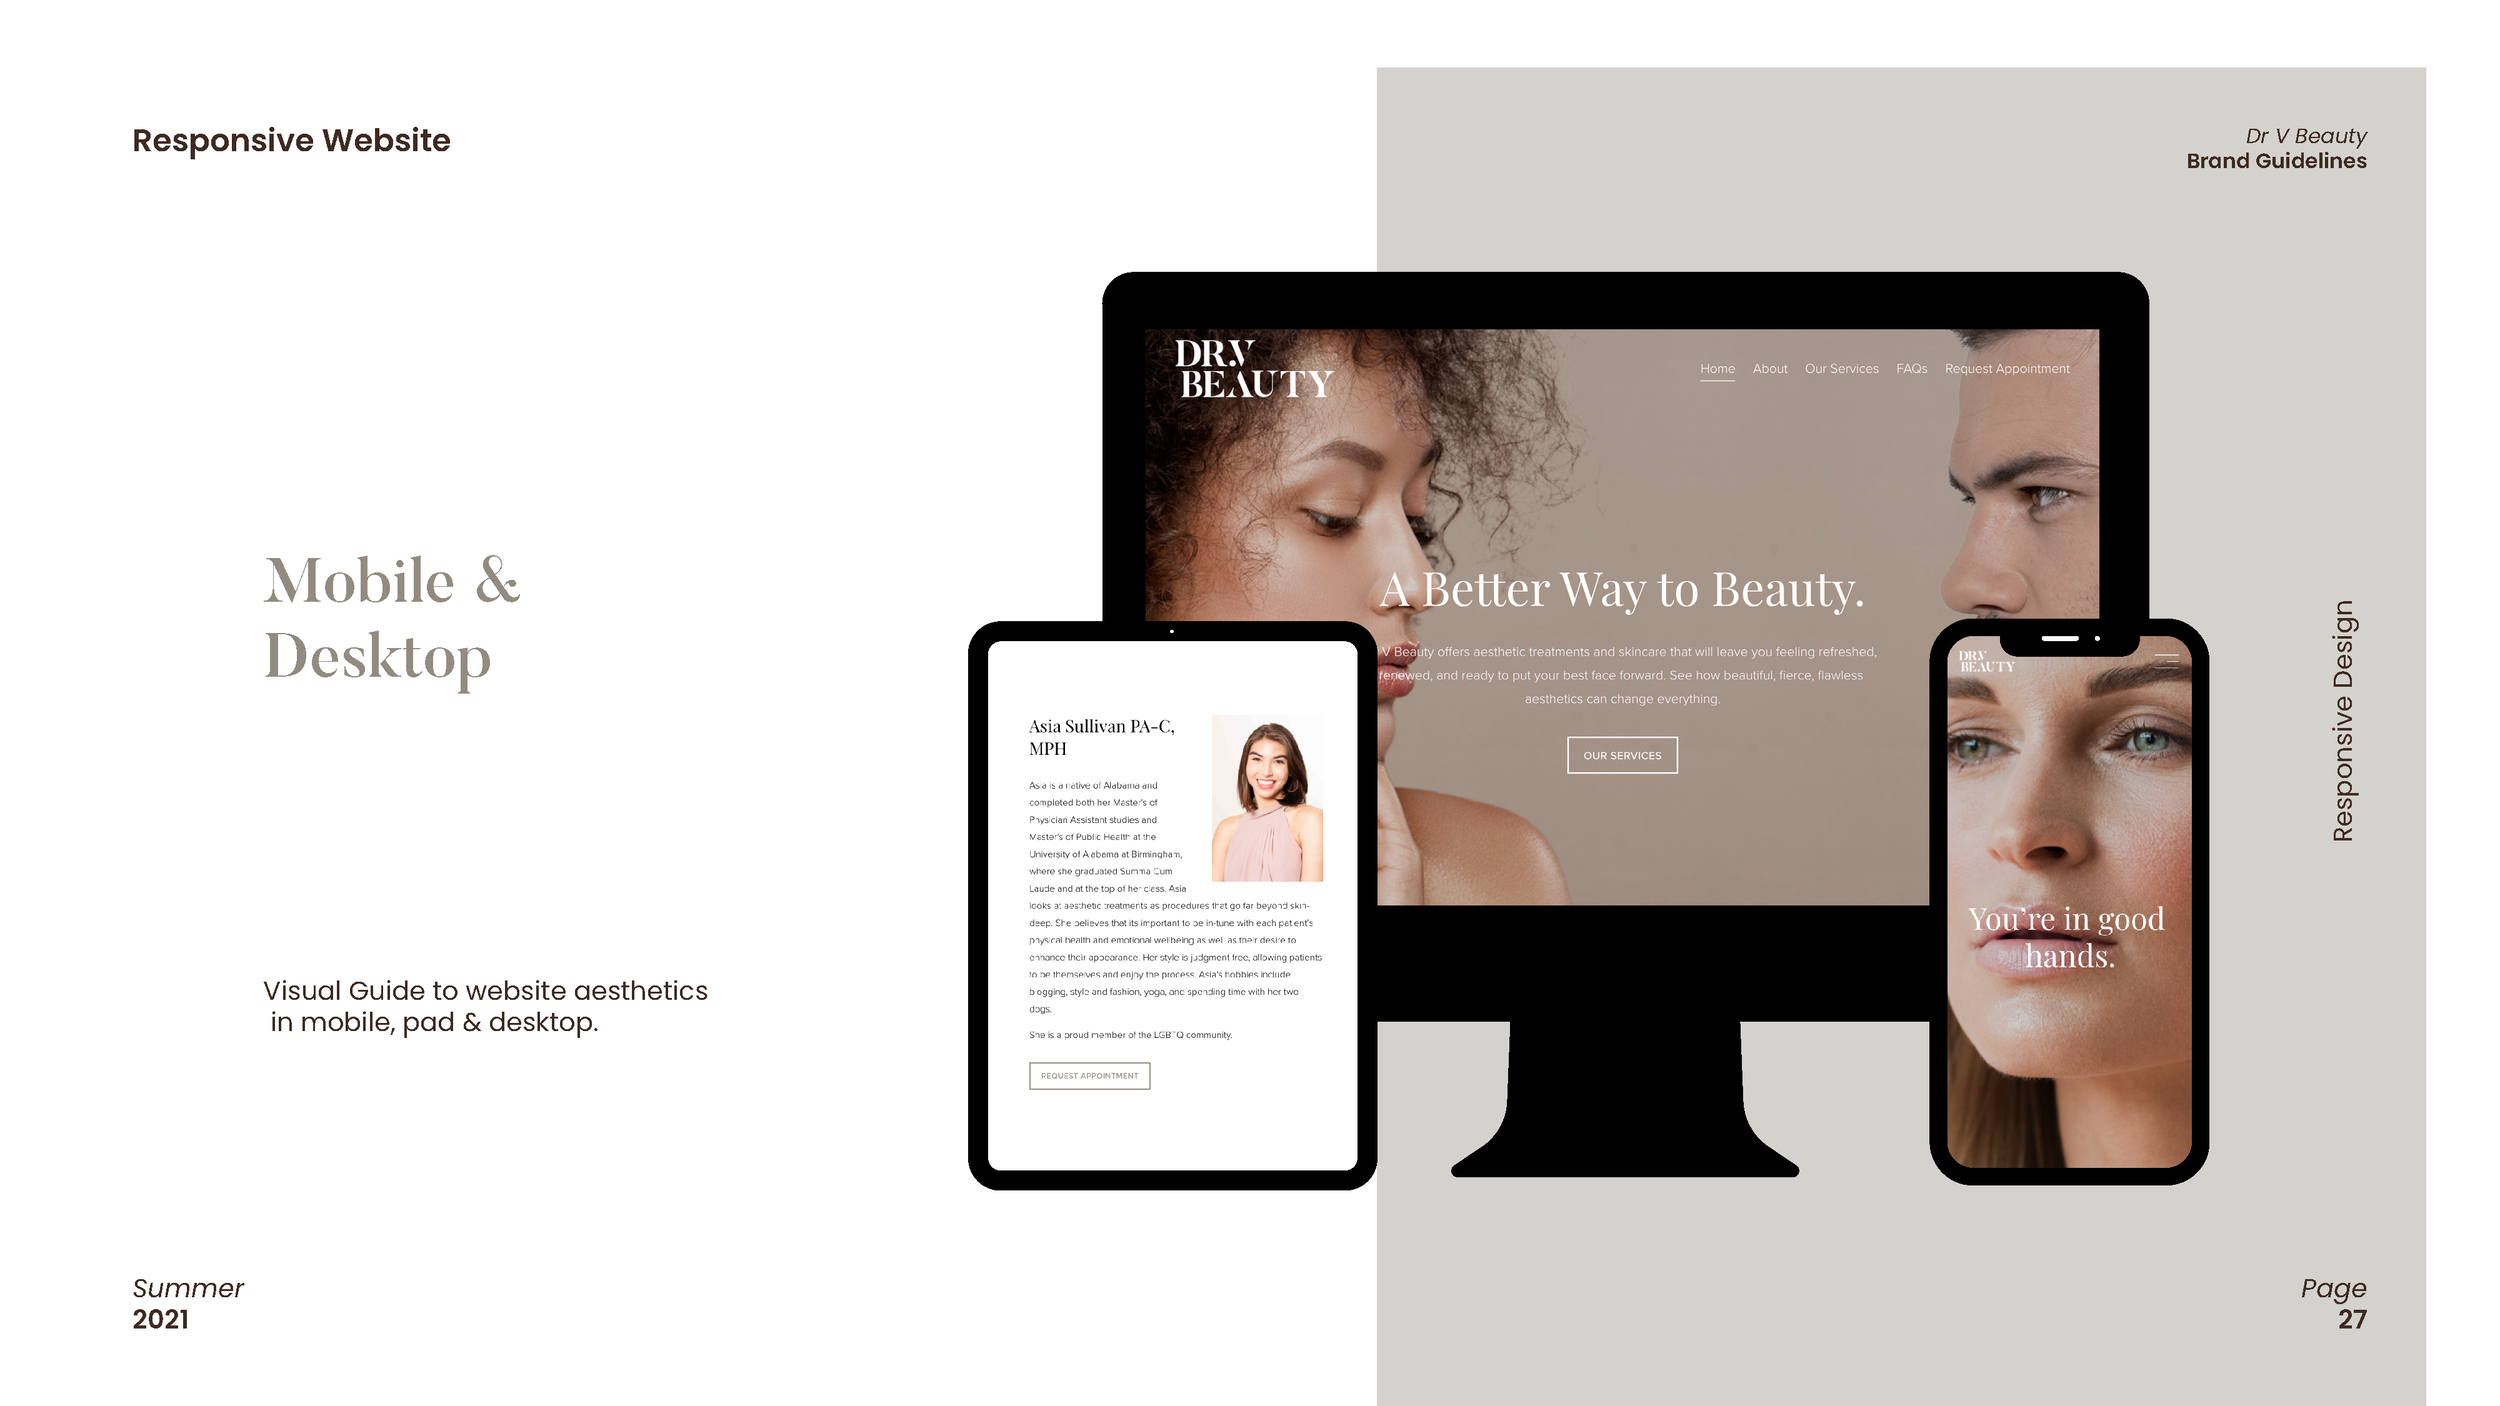 Dr V Beauty - Brand Guidelines_Page_27.png